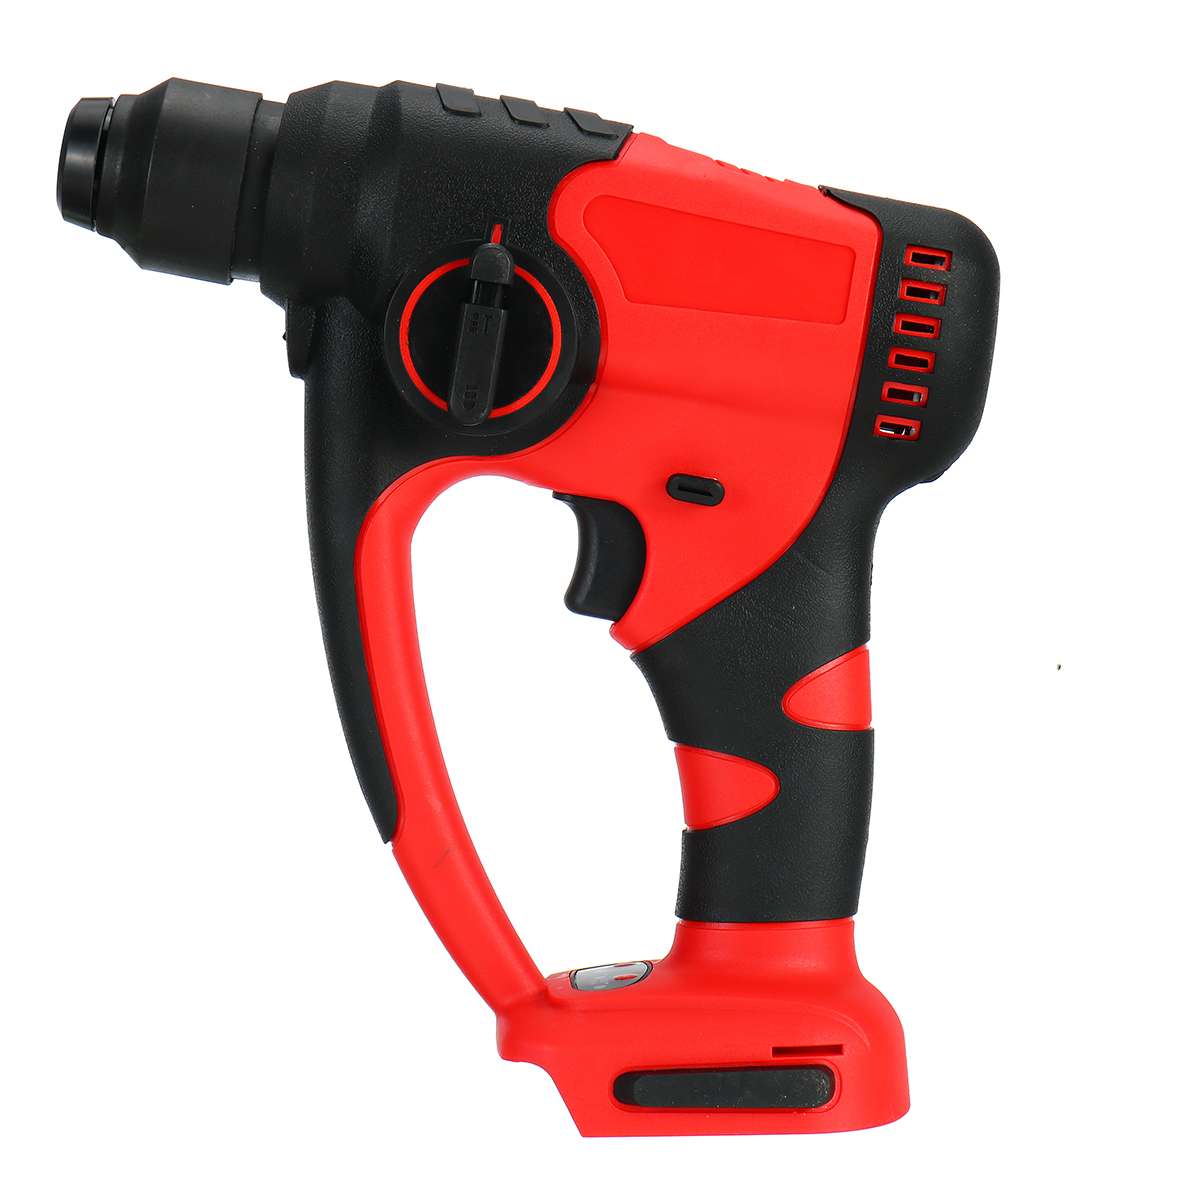 Brushless Cordless Rotary Hammer Drill Electric Demolition Hammer Power Impact Drill Adapted For Makita Battery